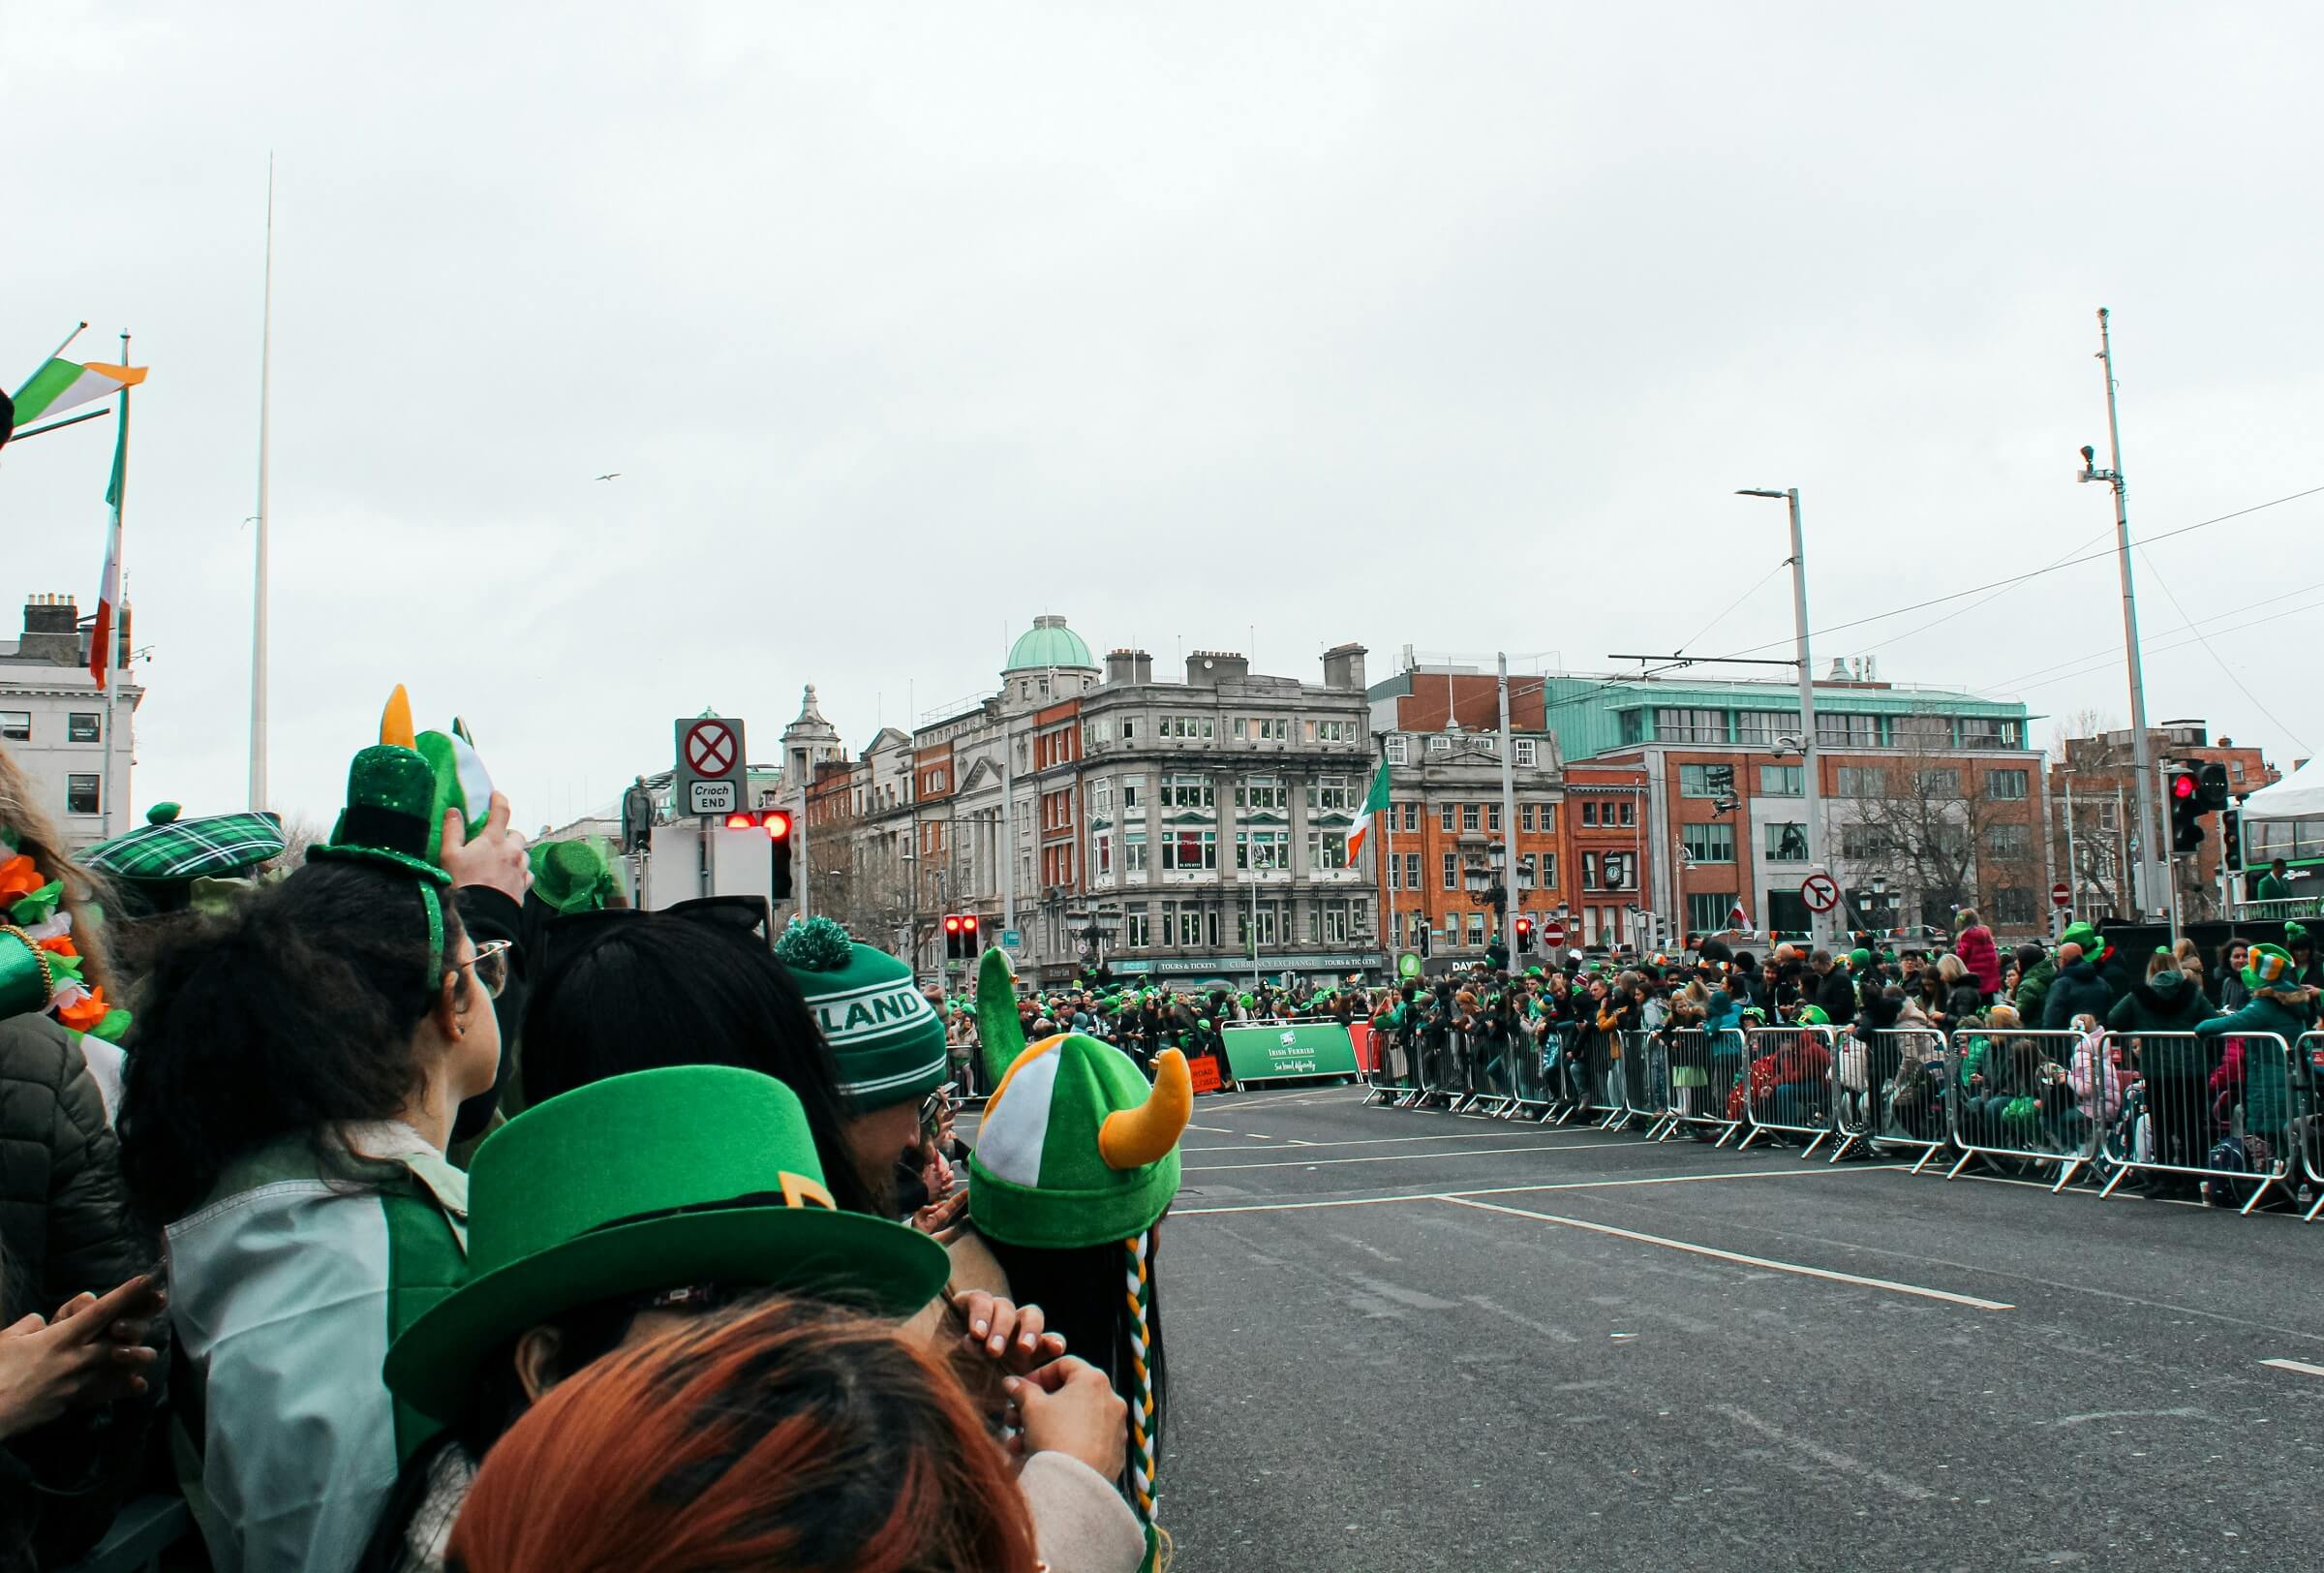 People in St. Patrick's Day gear gather along a street for a St. Patrick's Day parade.